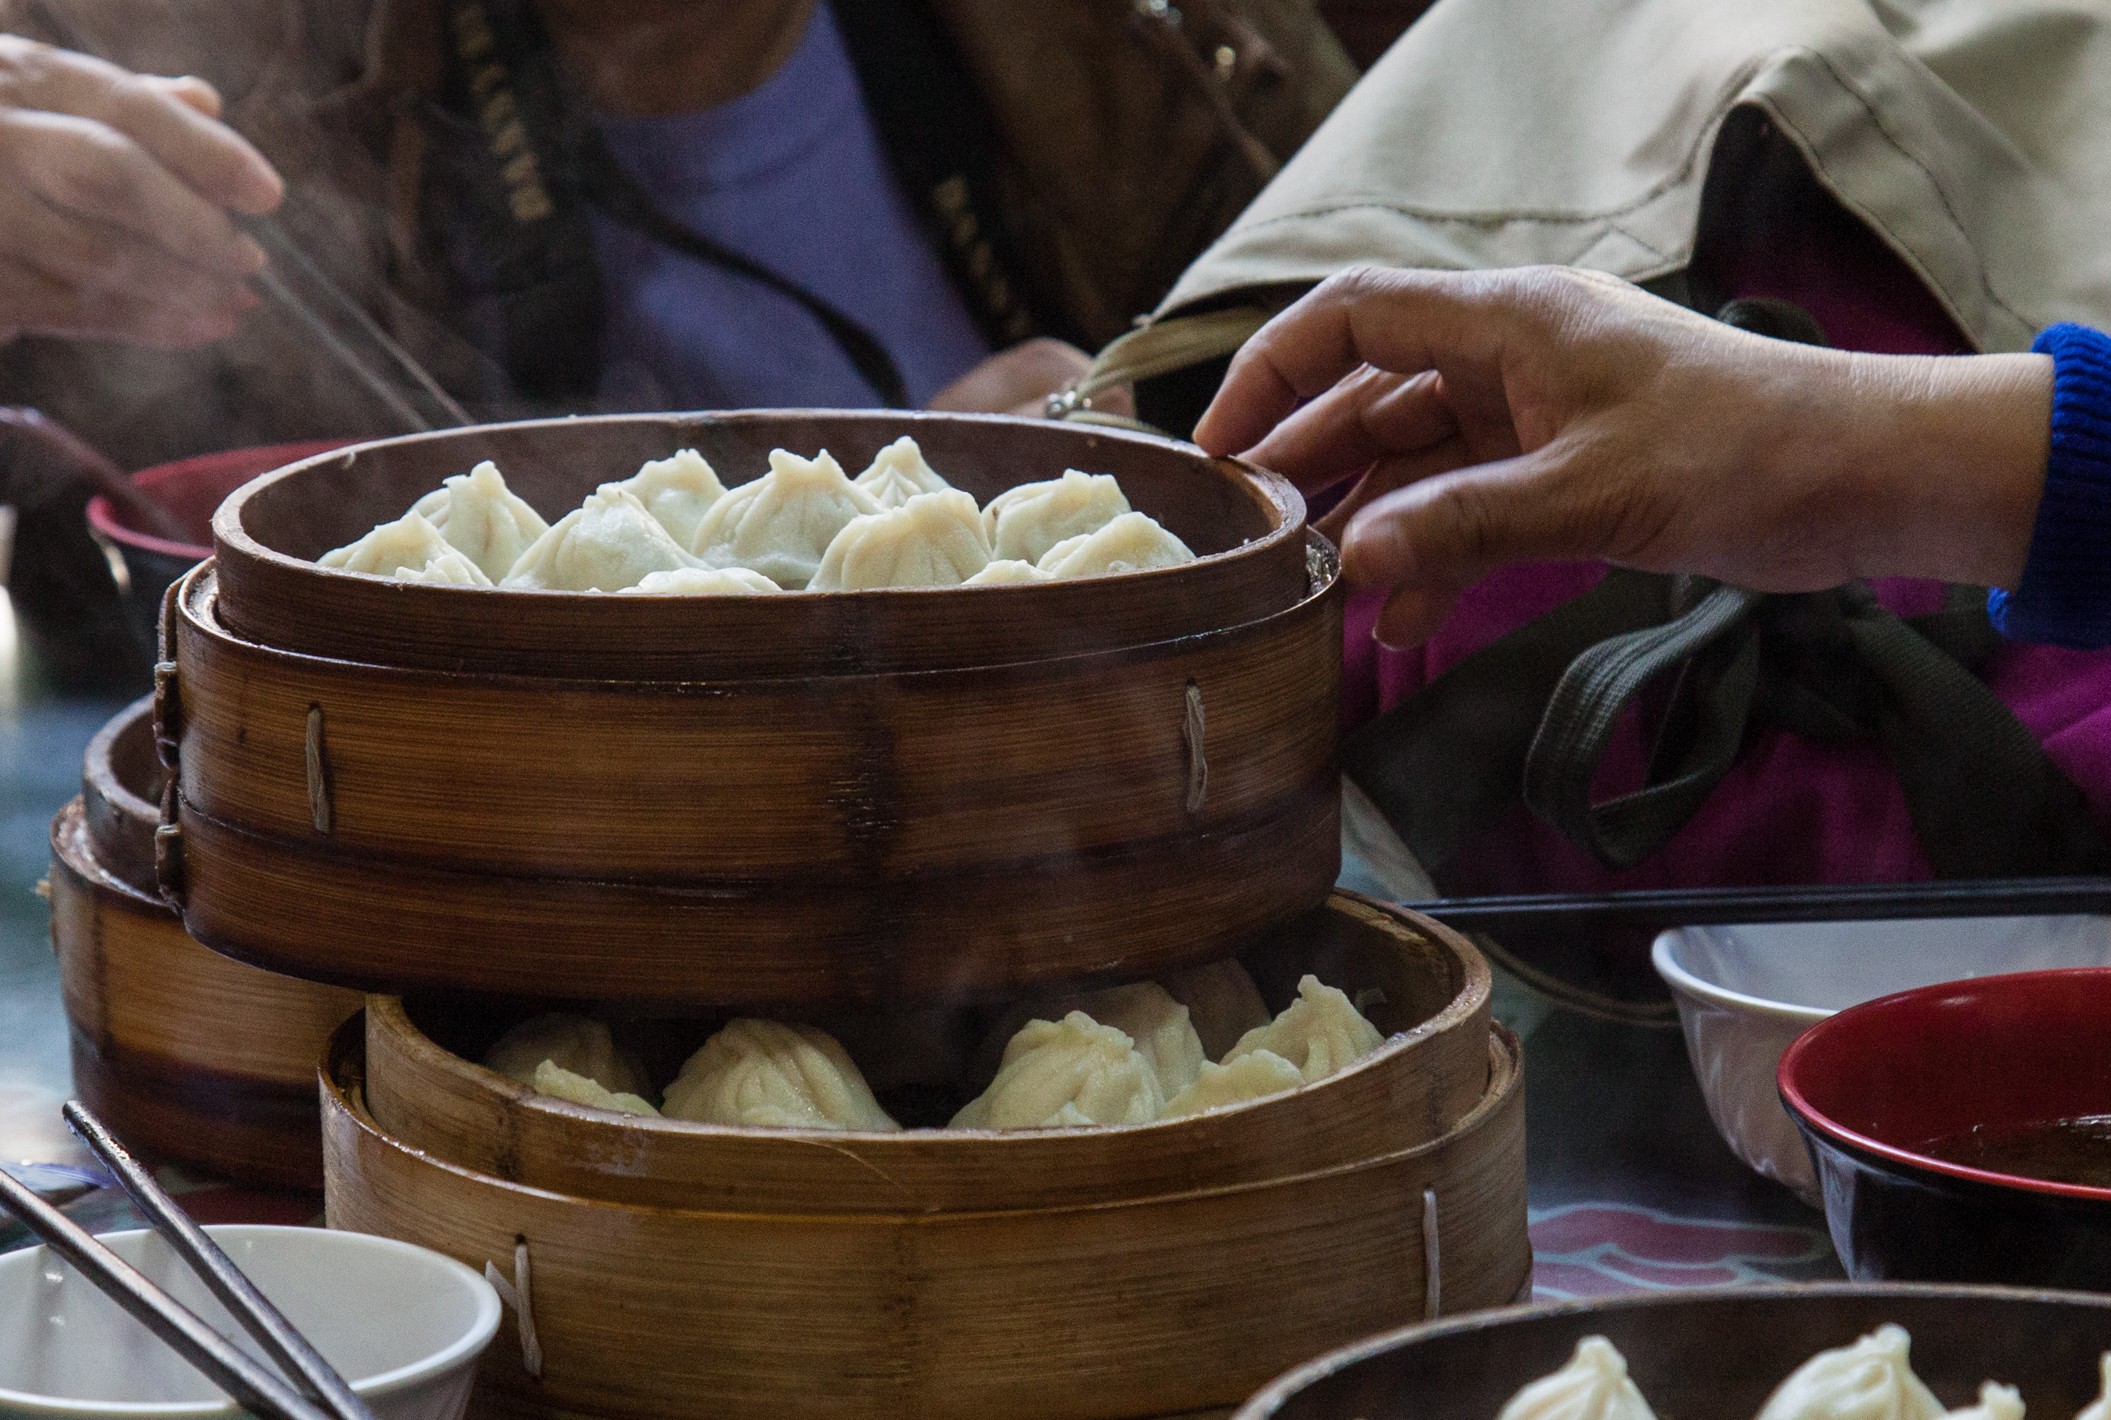 The dainty, soup-filled treats are served everywhere in China’s most glamorous city, but sampling the finest requires insider knowledge